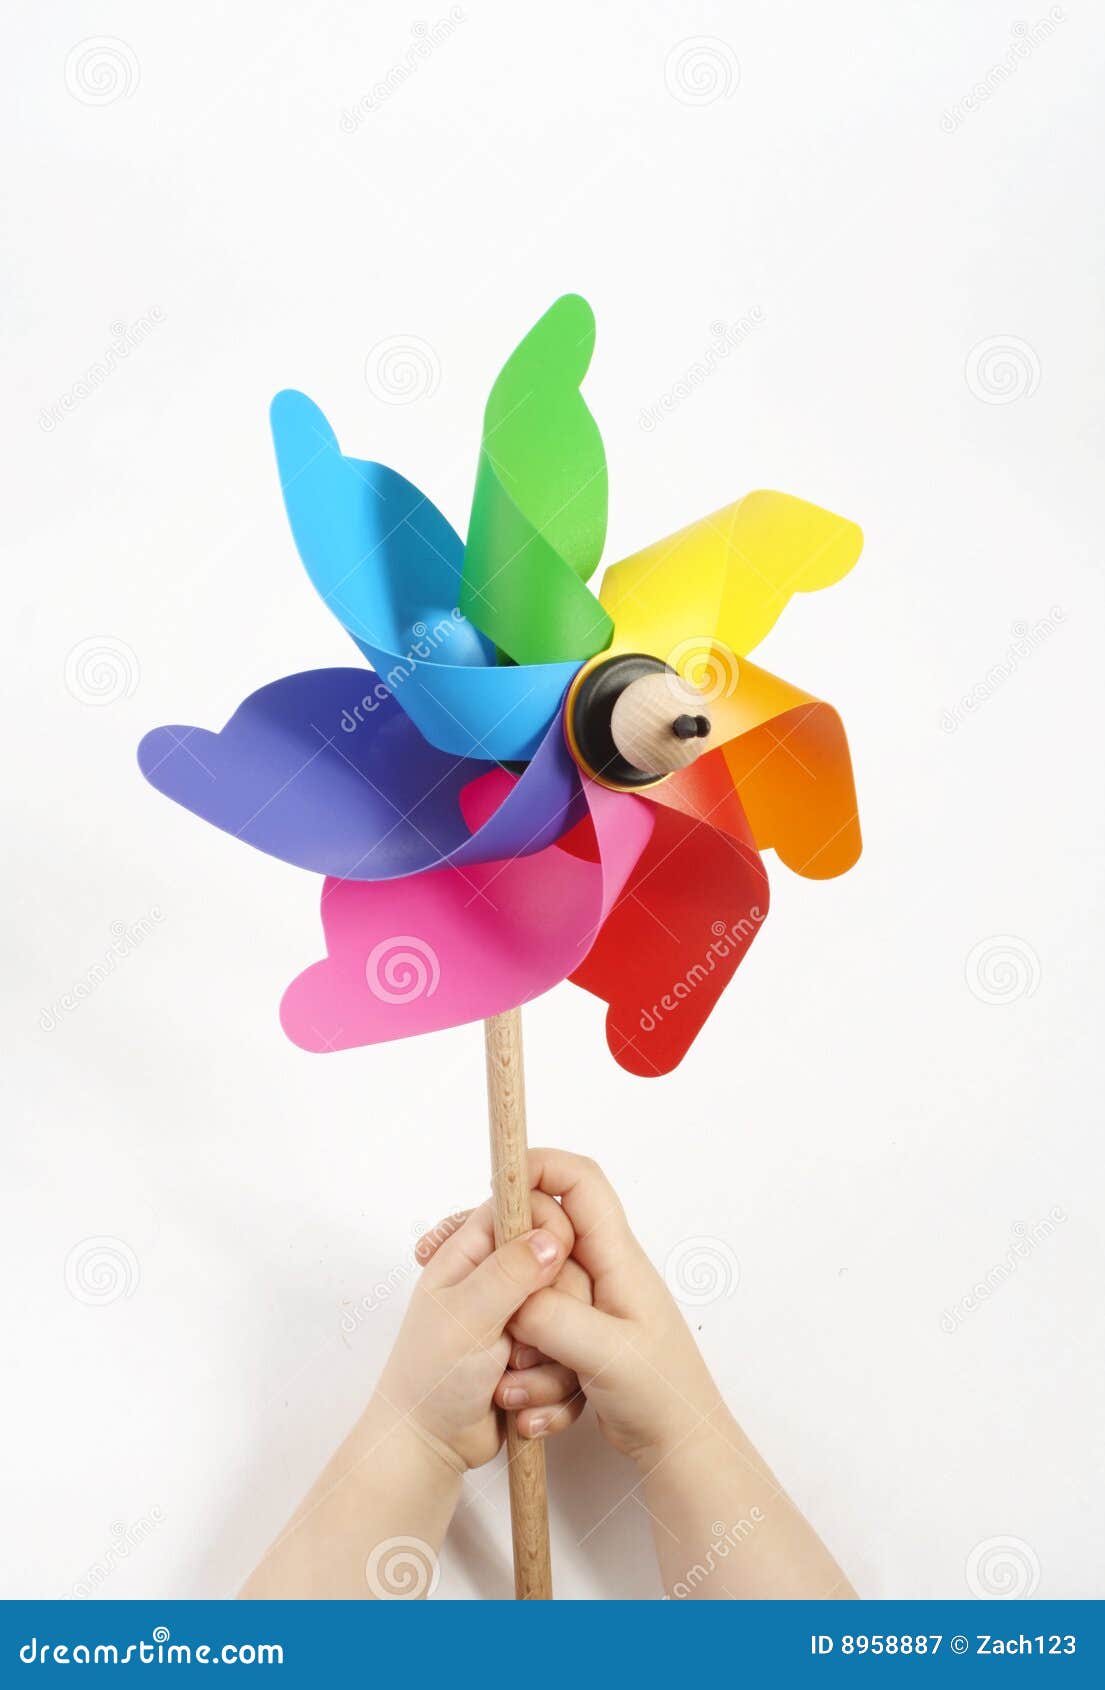 Kids hands holding a windmill with lots of color an a white background 